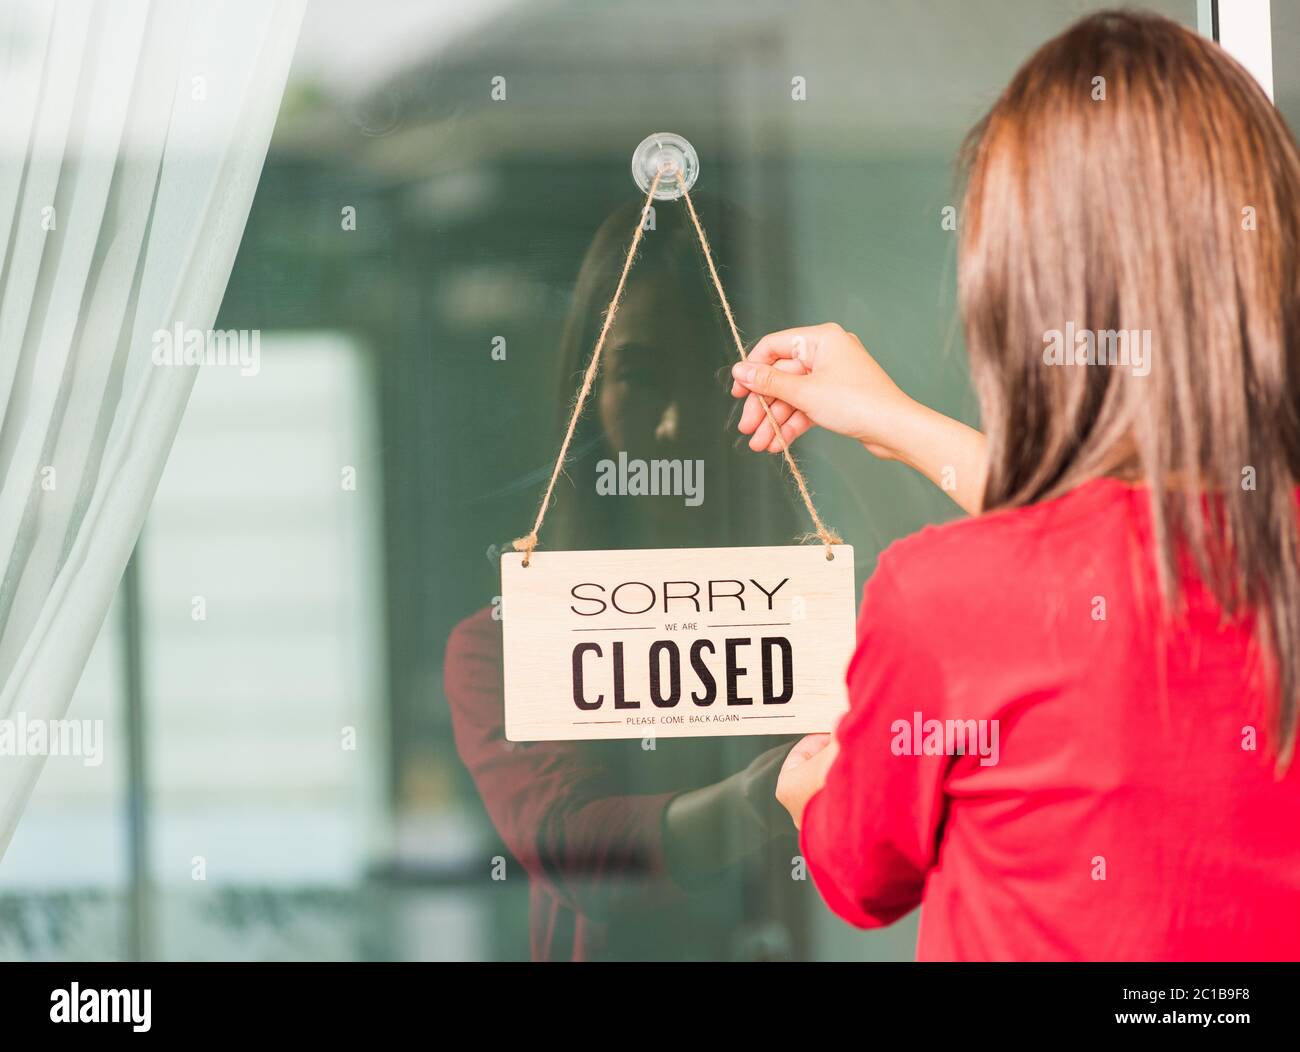 Your come in back. Come back картинки. Sorry we are closed. Sorry we are booked картинки. Compliance Notice женщина.